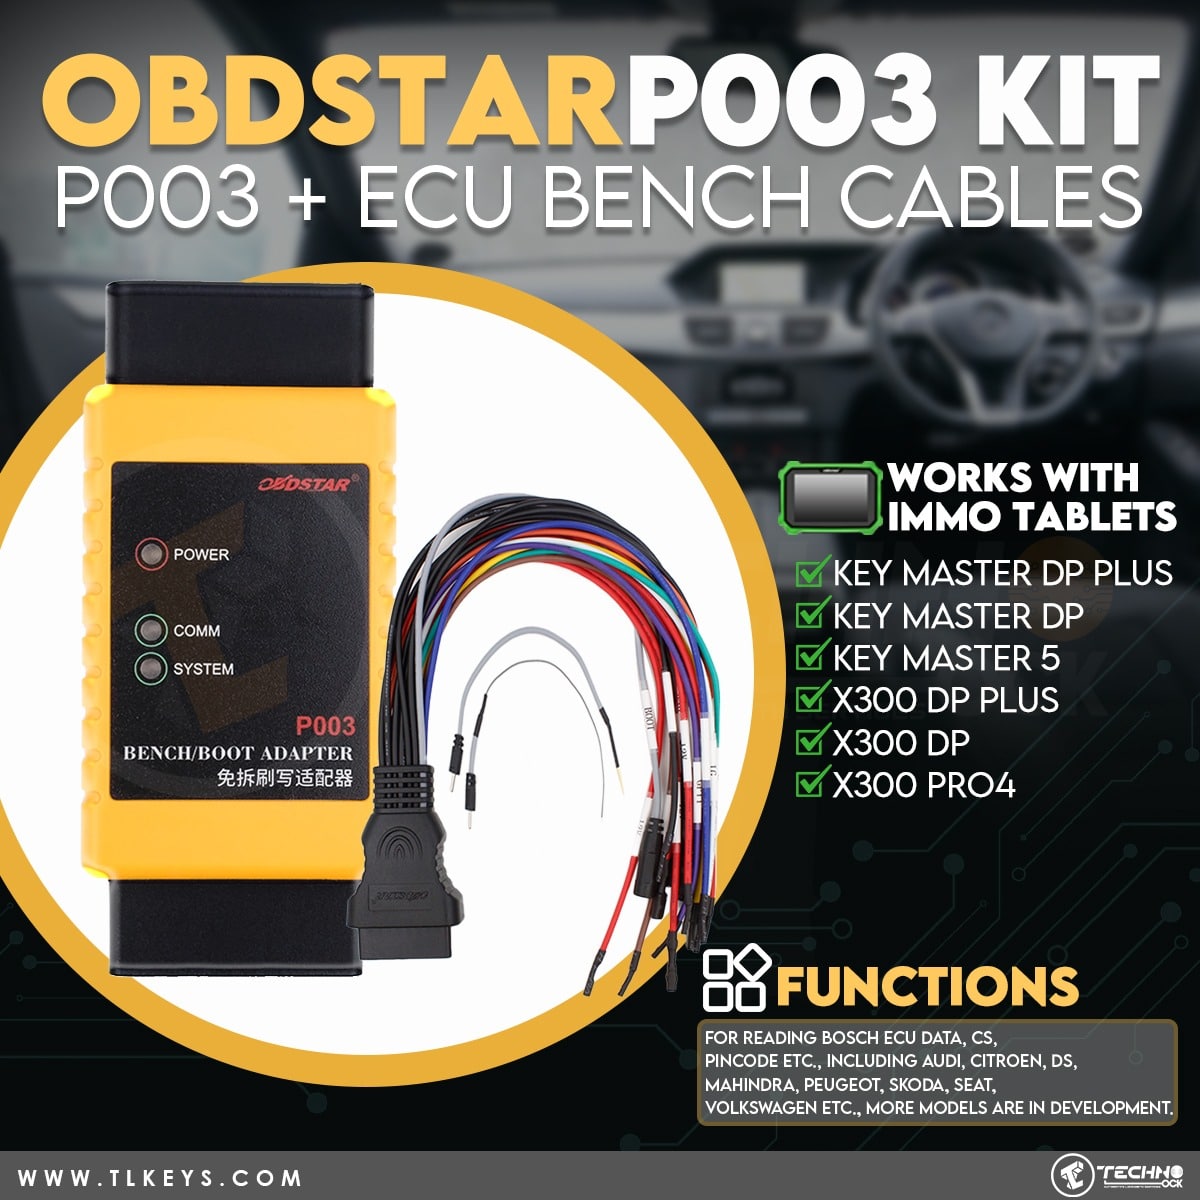 OBDSTAR P003 KIT Adapter with ECU Bench Cables Working With OBDSTAR X300 DP/ X300 DP PLUS/ X300 PRO4/ Key Master DP